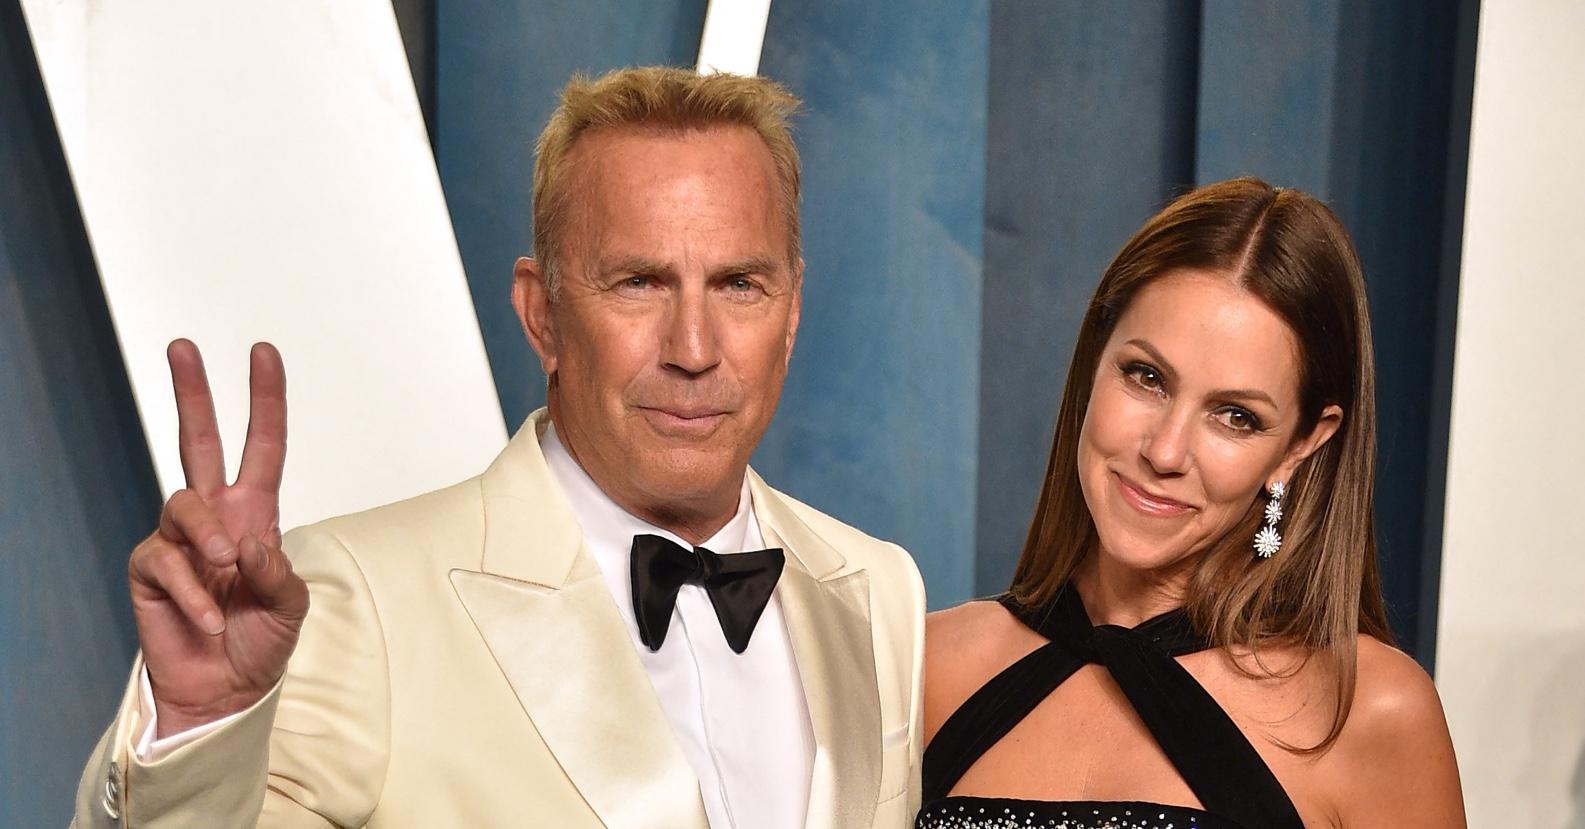 Kevin Costner Wears Wedding Ring 1 Day Before Wife Filed For Divorce pic